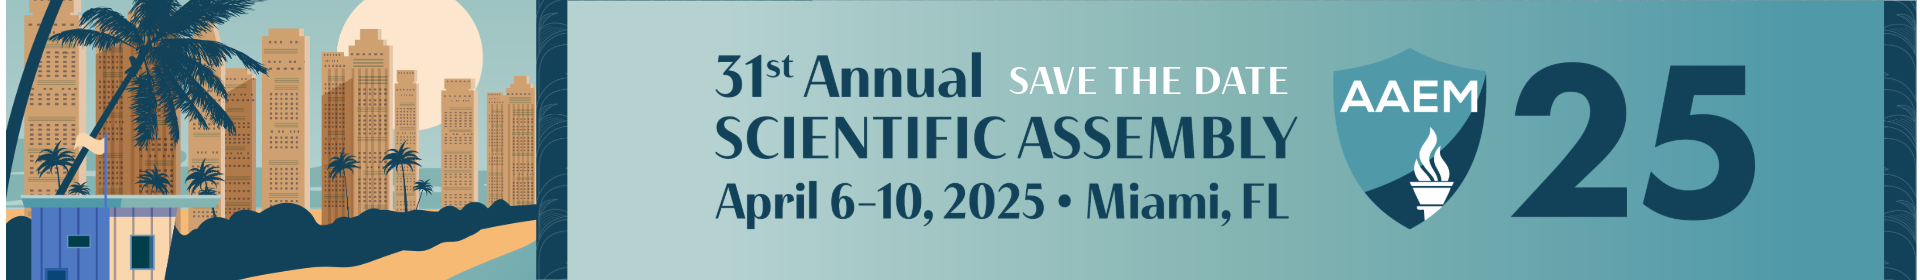 2025 Scientific Assembly Event Banner